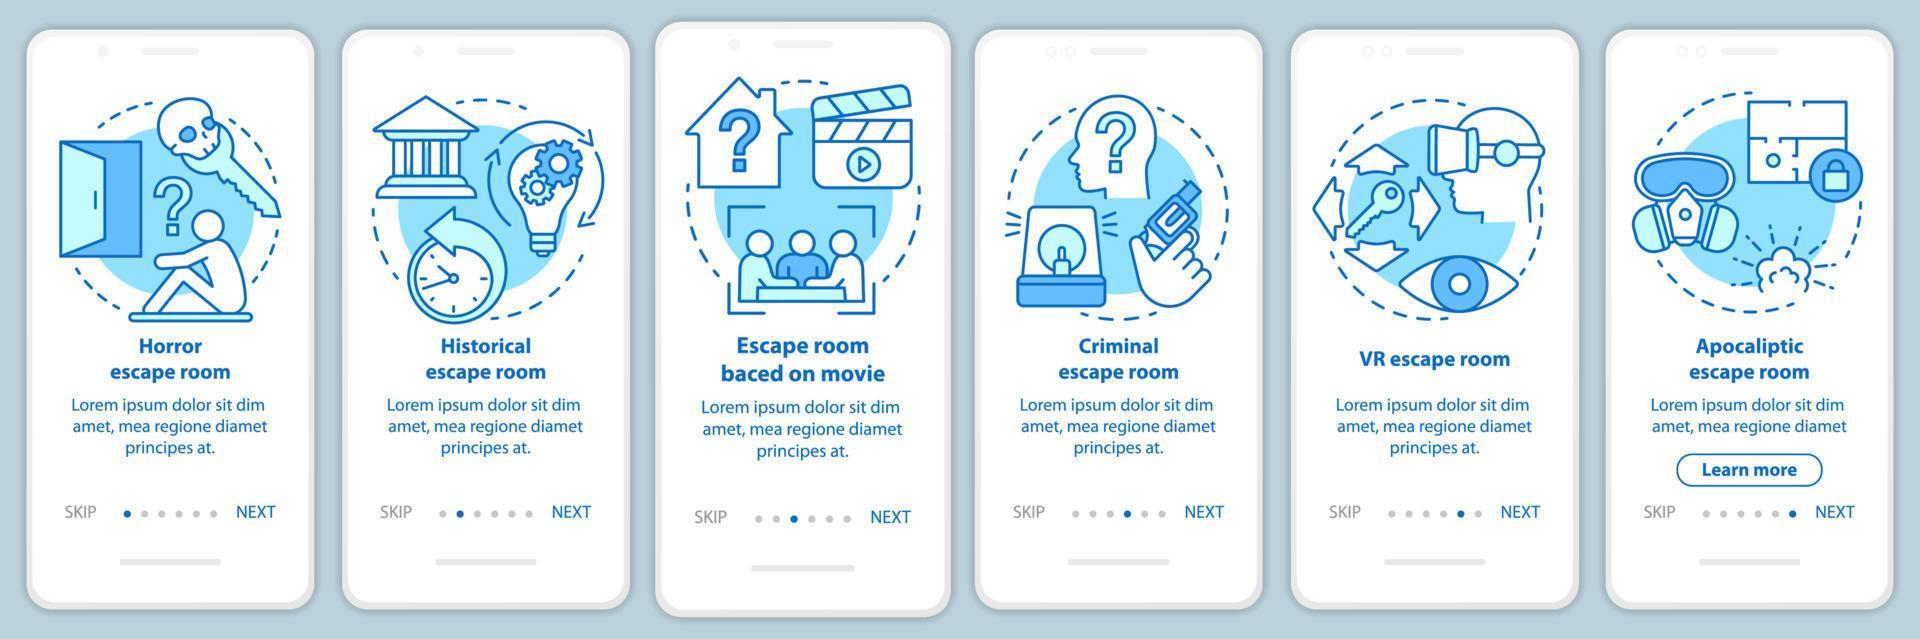 Escape room types turquoise onboarding mobile app page screen with linear concepts. Quest game categories. Walkthrough graphic instructions. UX, UI, GUI vector template with illustrations